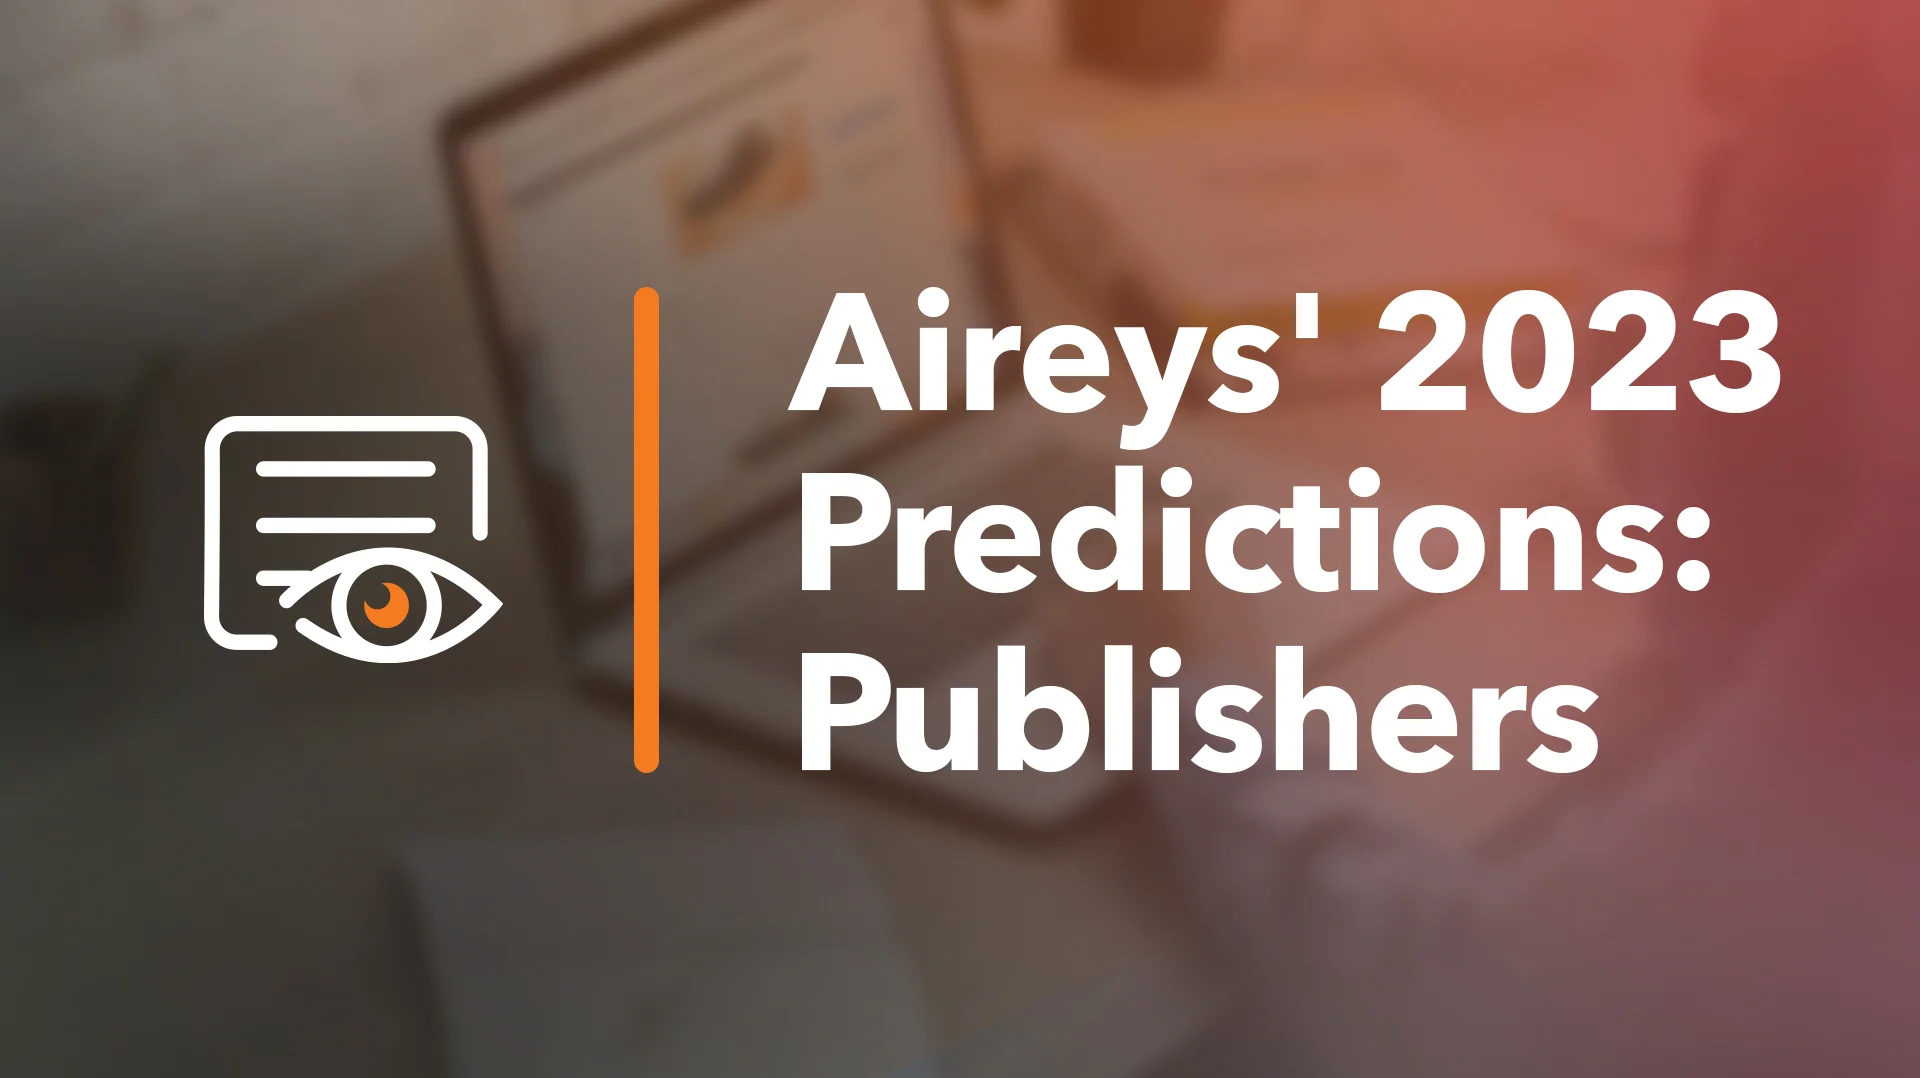 Trends for Publishers in 2023